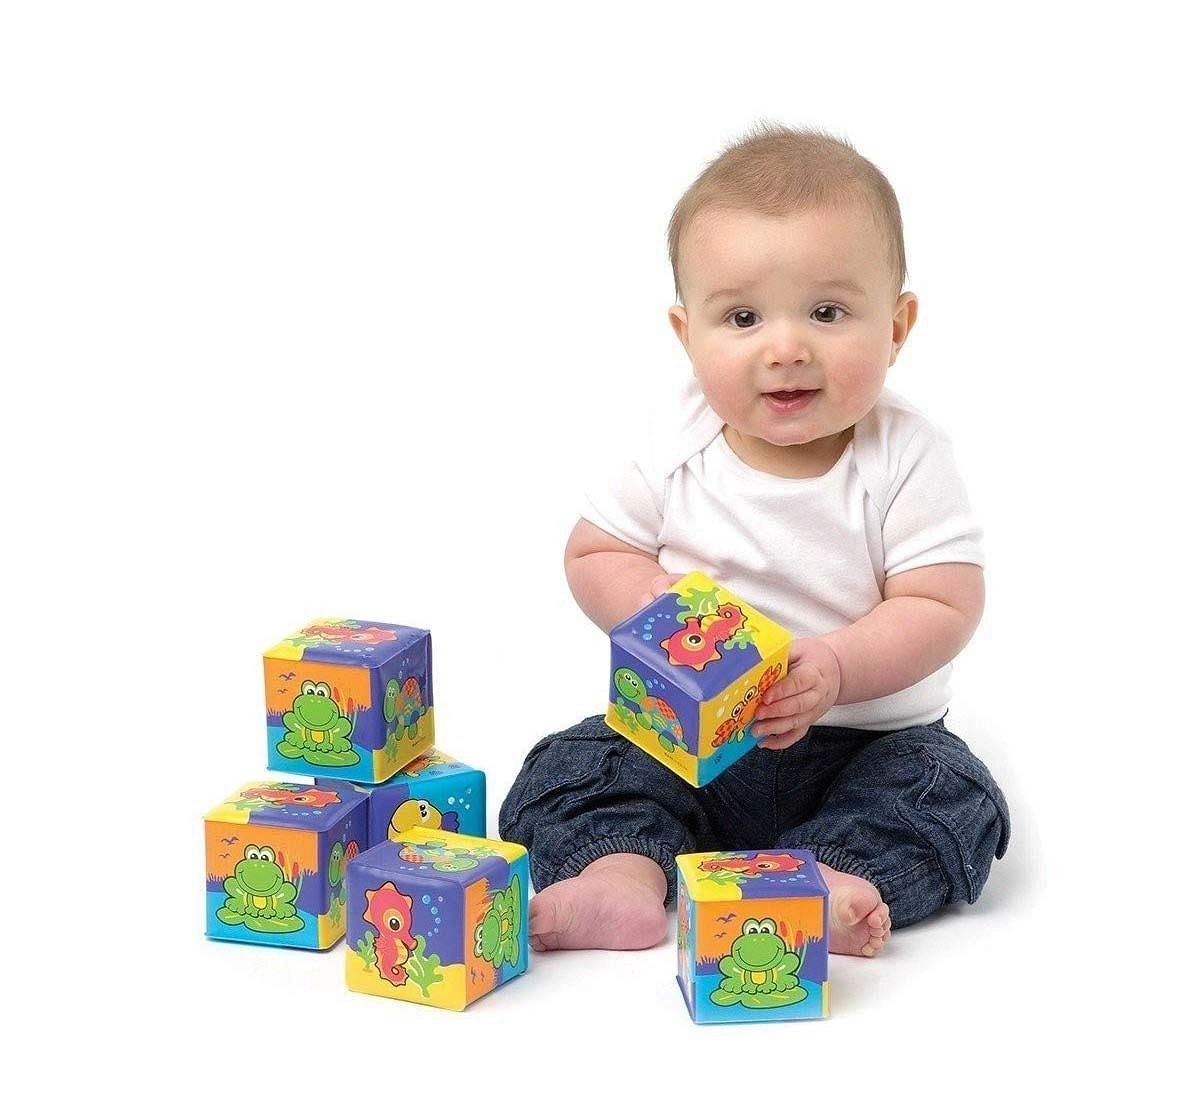 Playgro My First Soft Blocks - Multicolor Early Learner Toys for Kids age 3M+ 